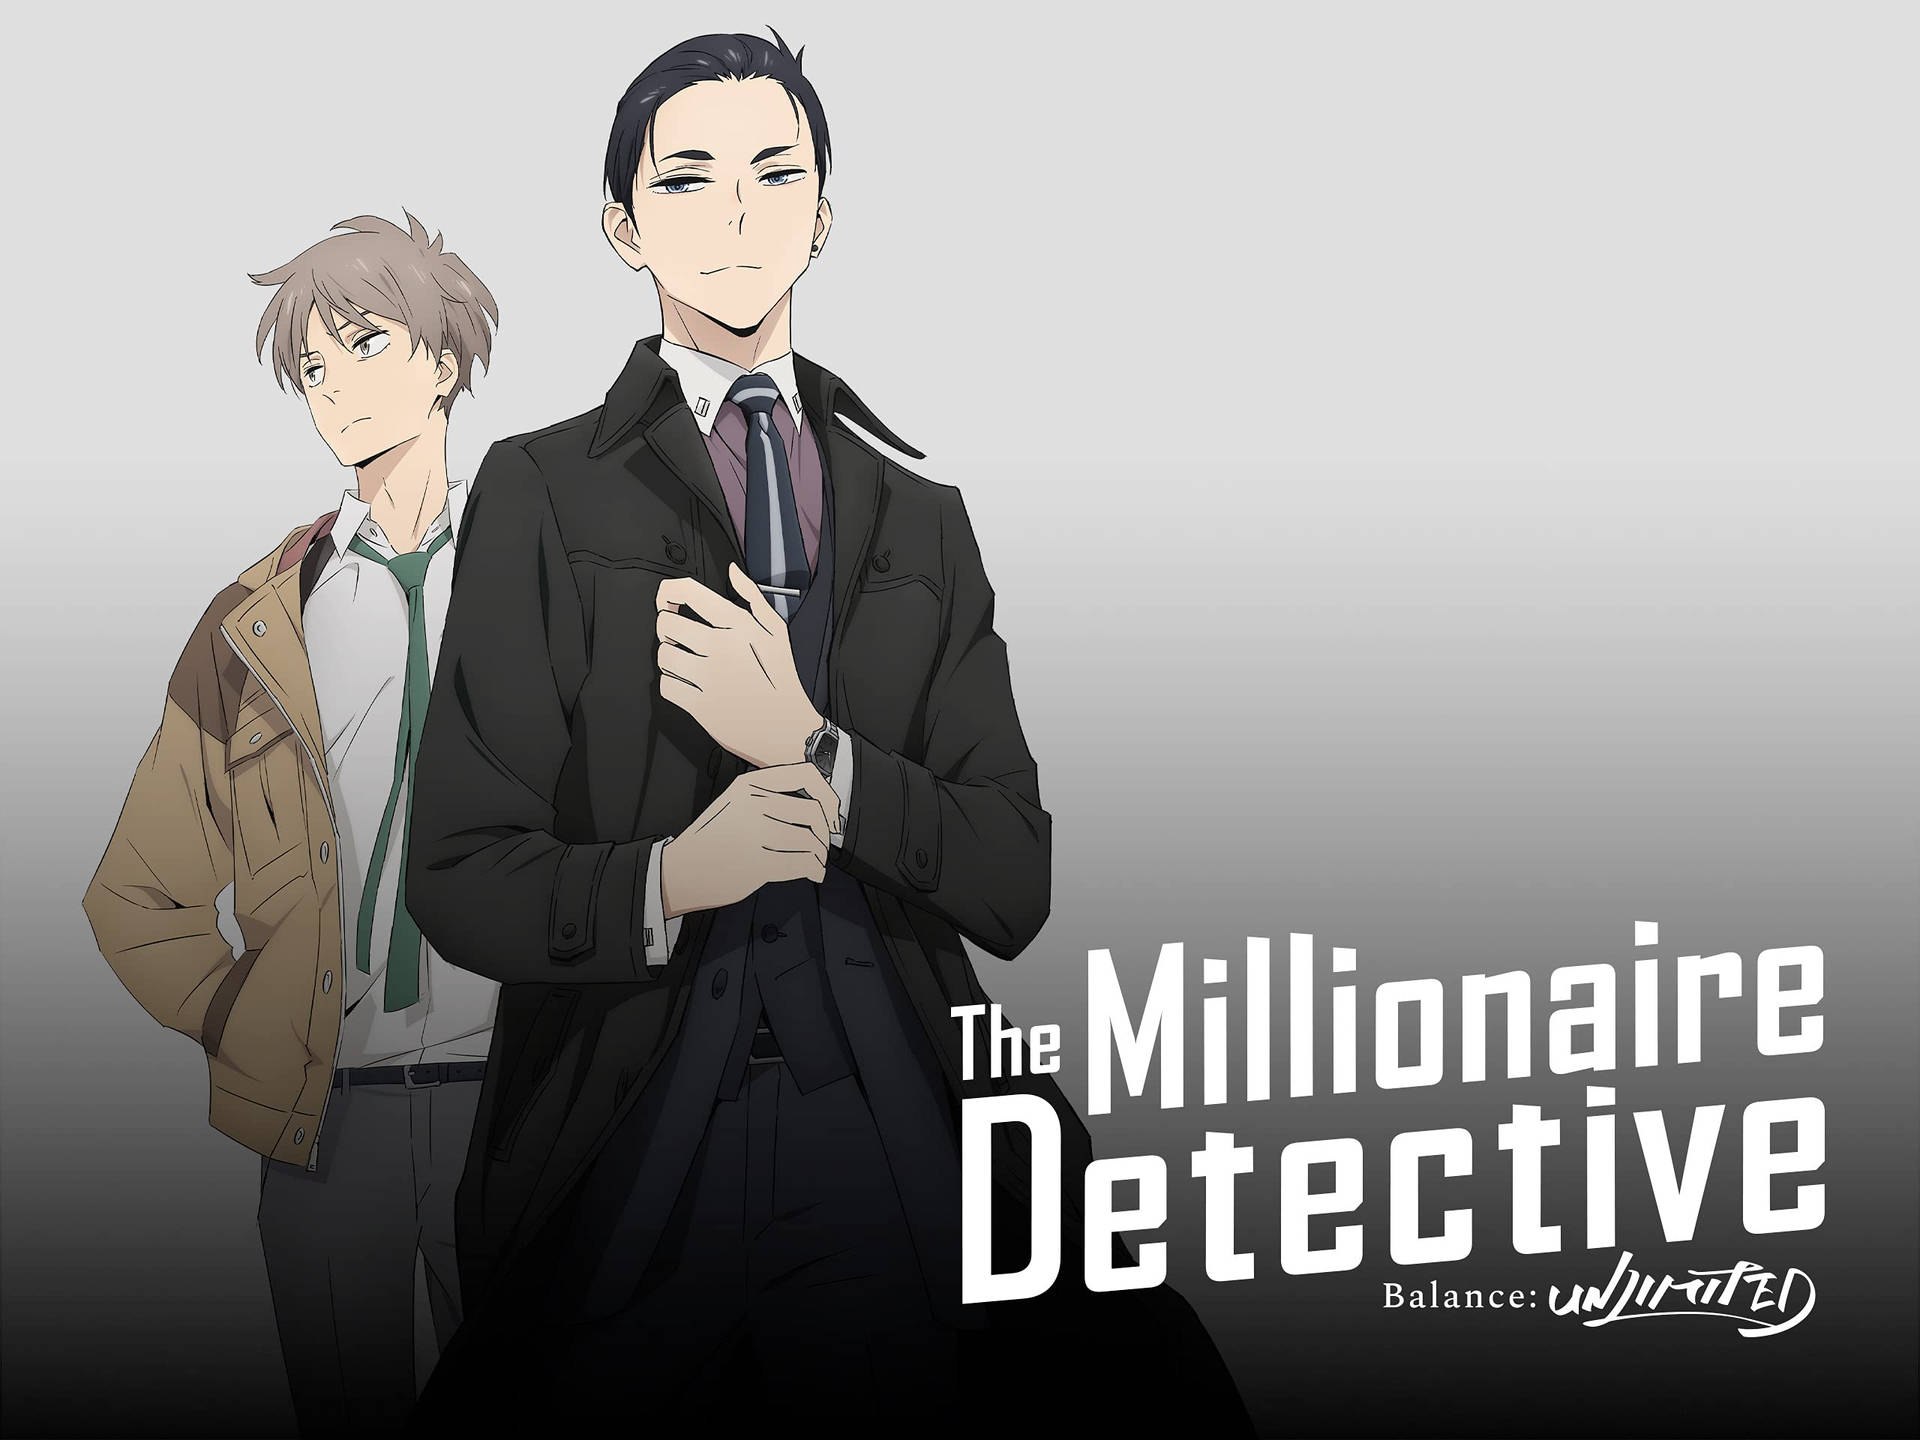 The Millionaire Detective Balance: Unlimited - Intriguing Anime Series Background